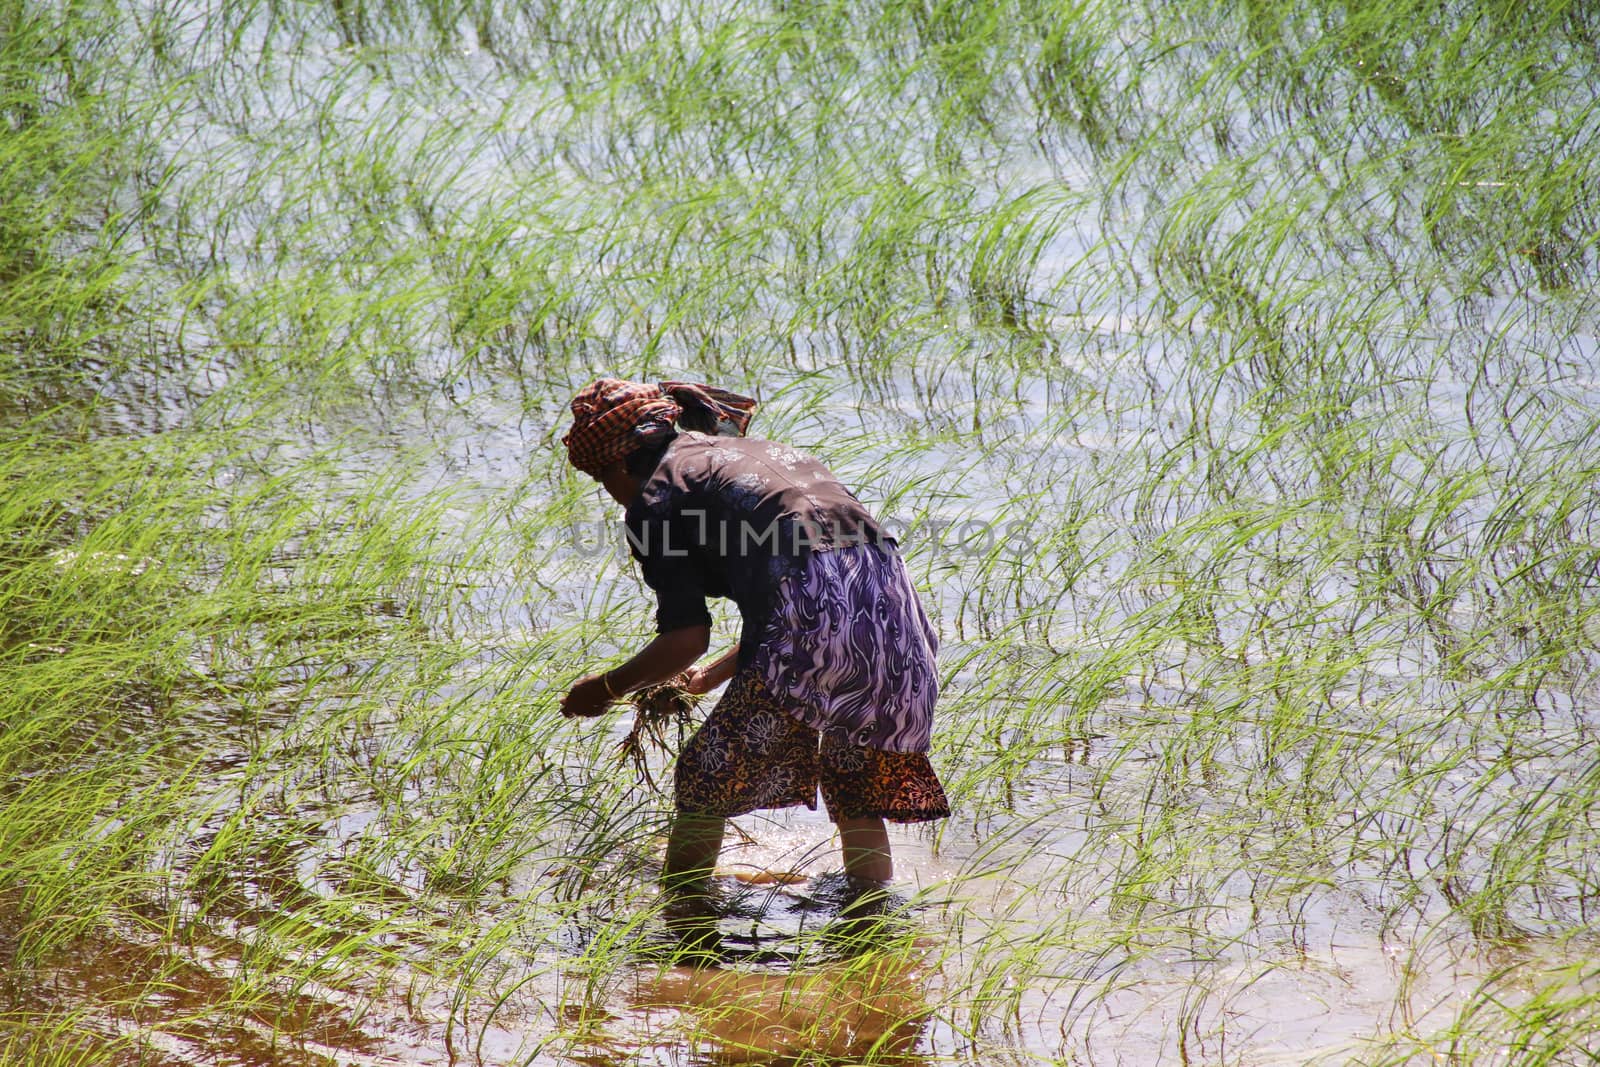 Editorial. A khmer woman planting rice in the rice paddy in Kampot Cambodia